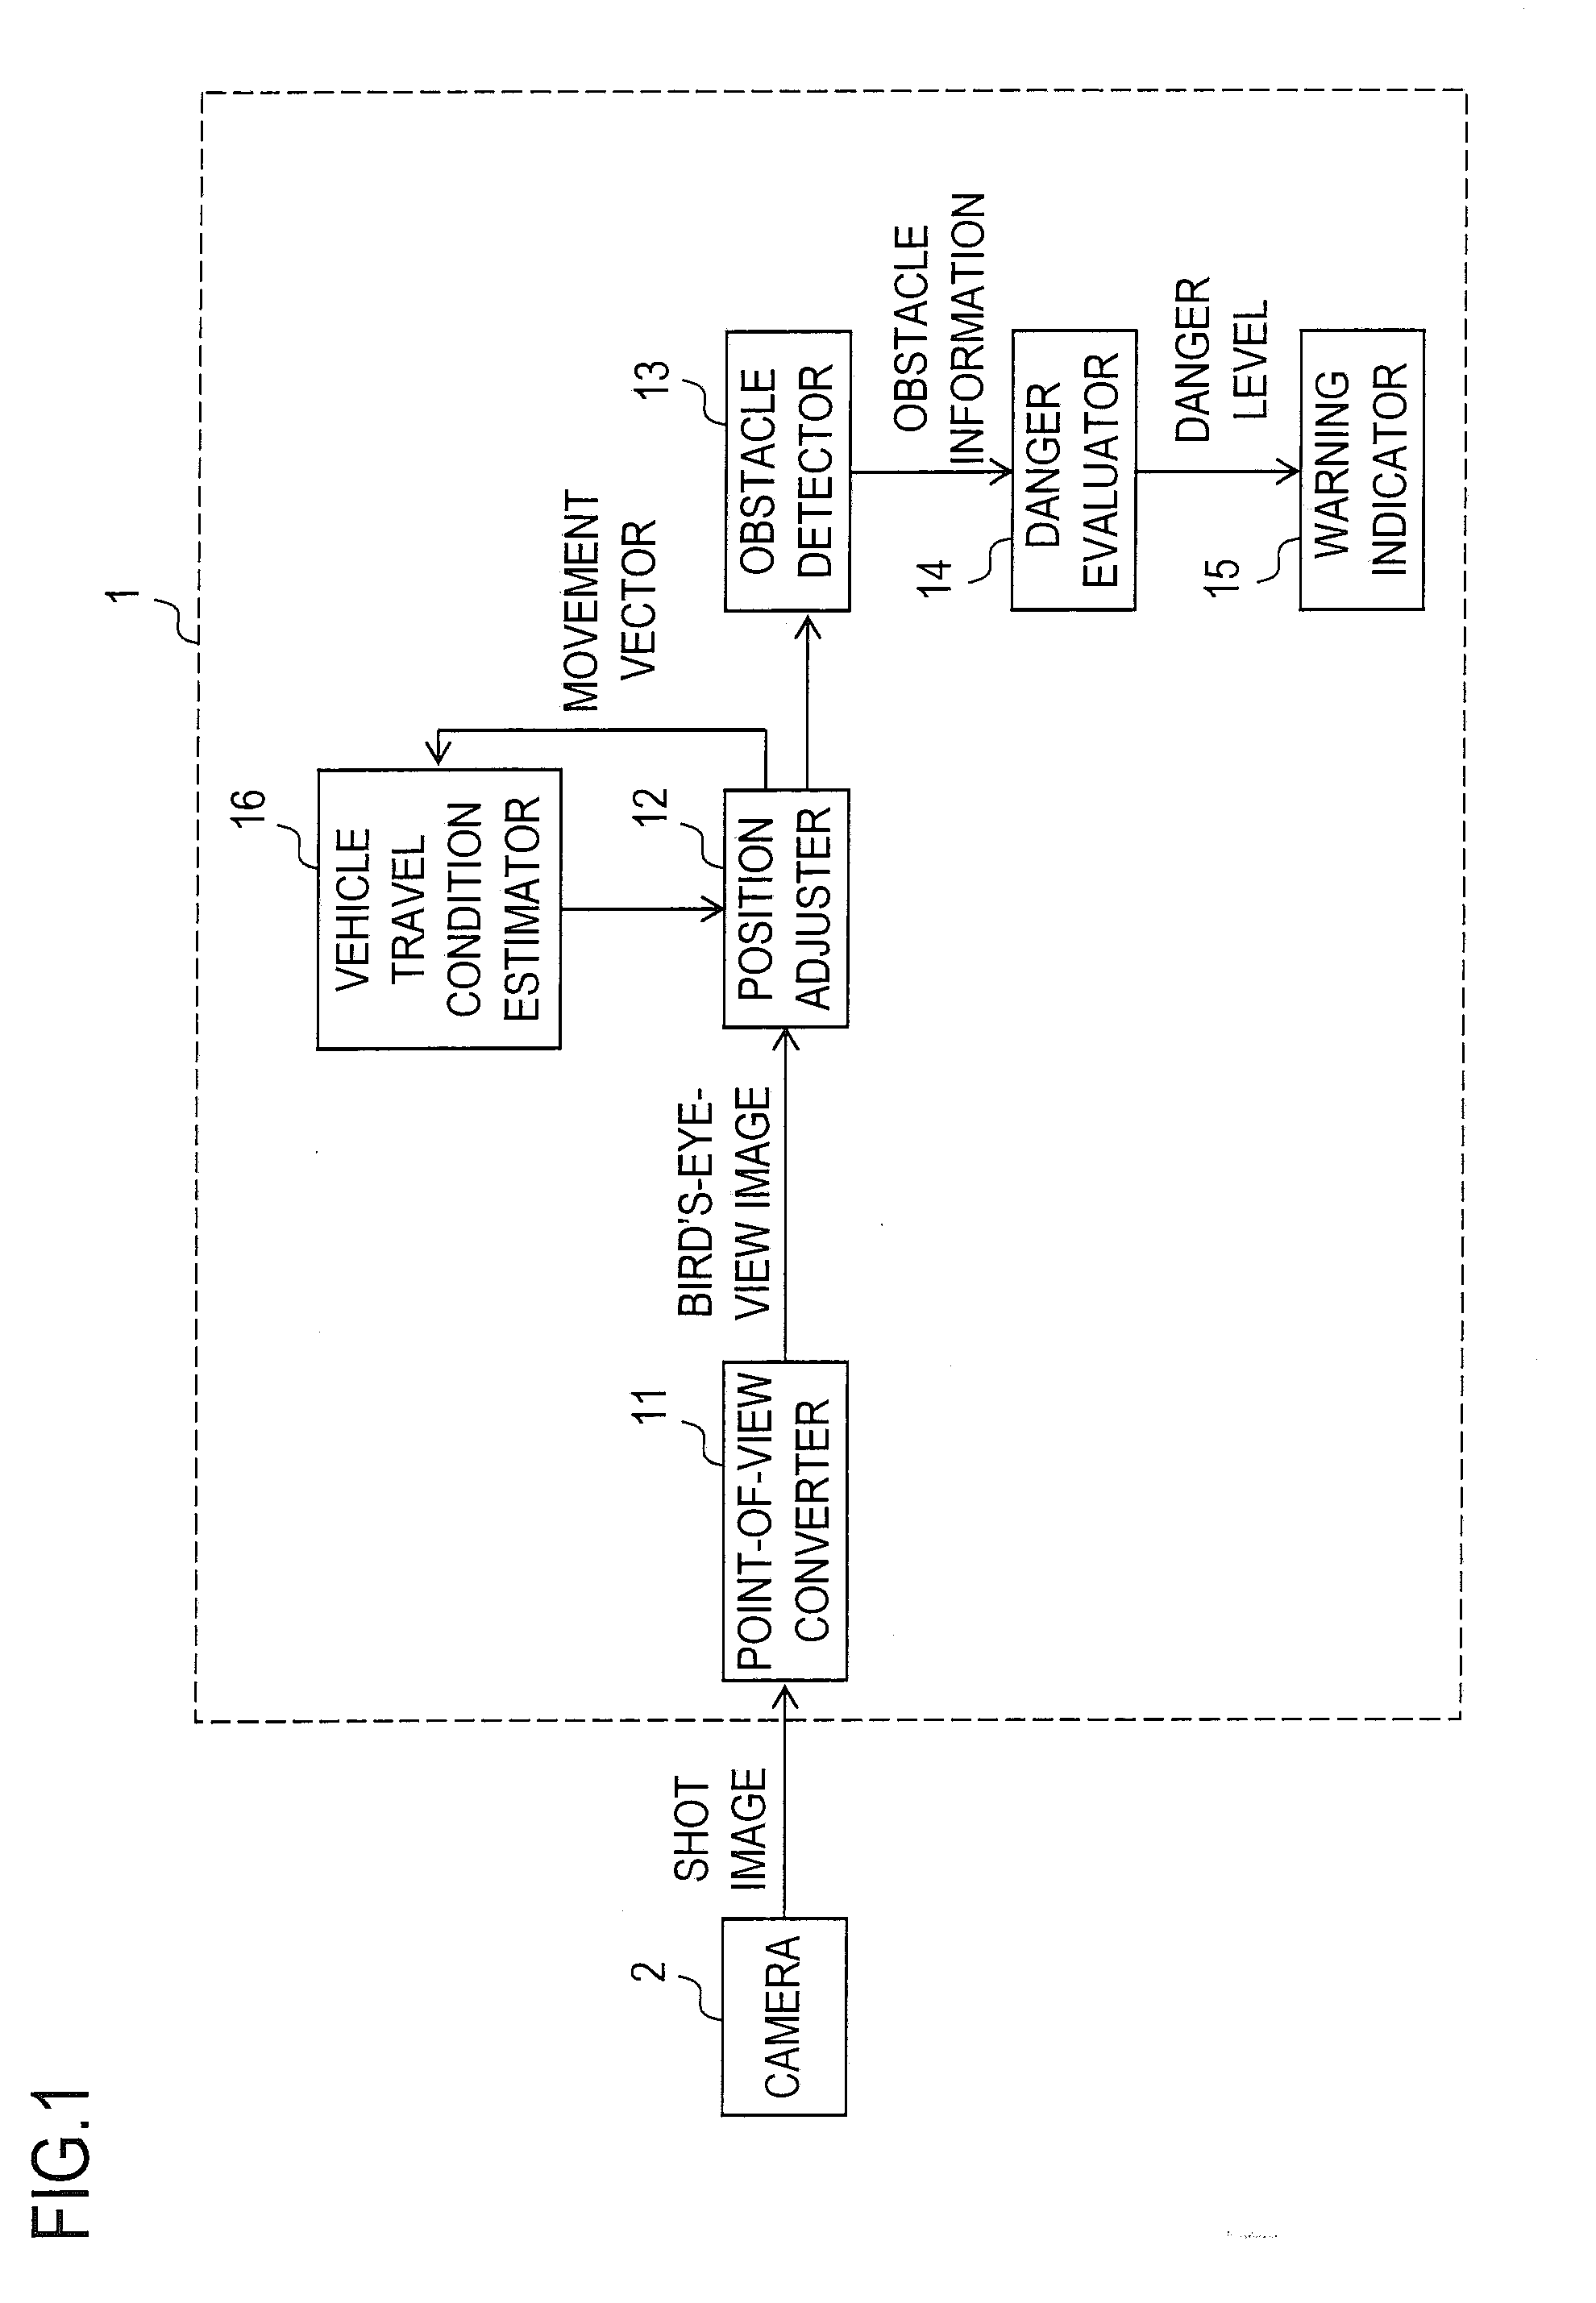 Apparatus and method for monitoring a vehicle's surroundings